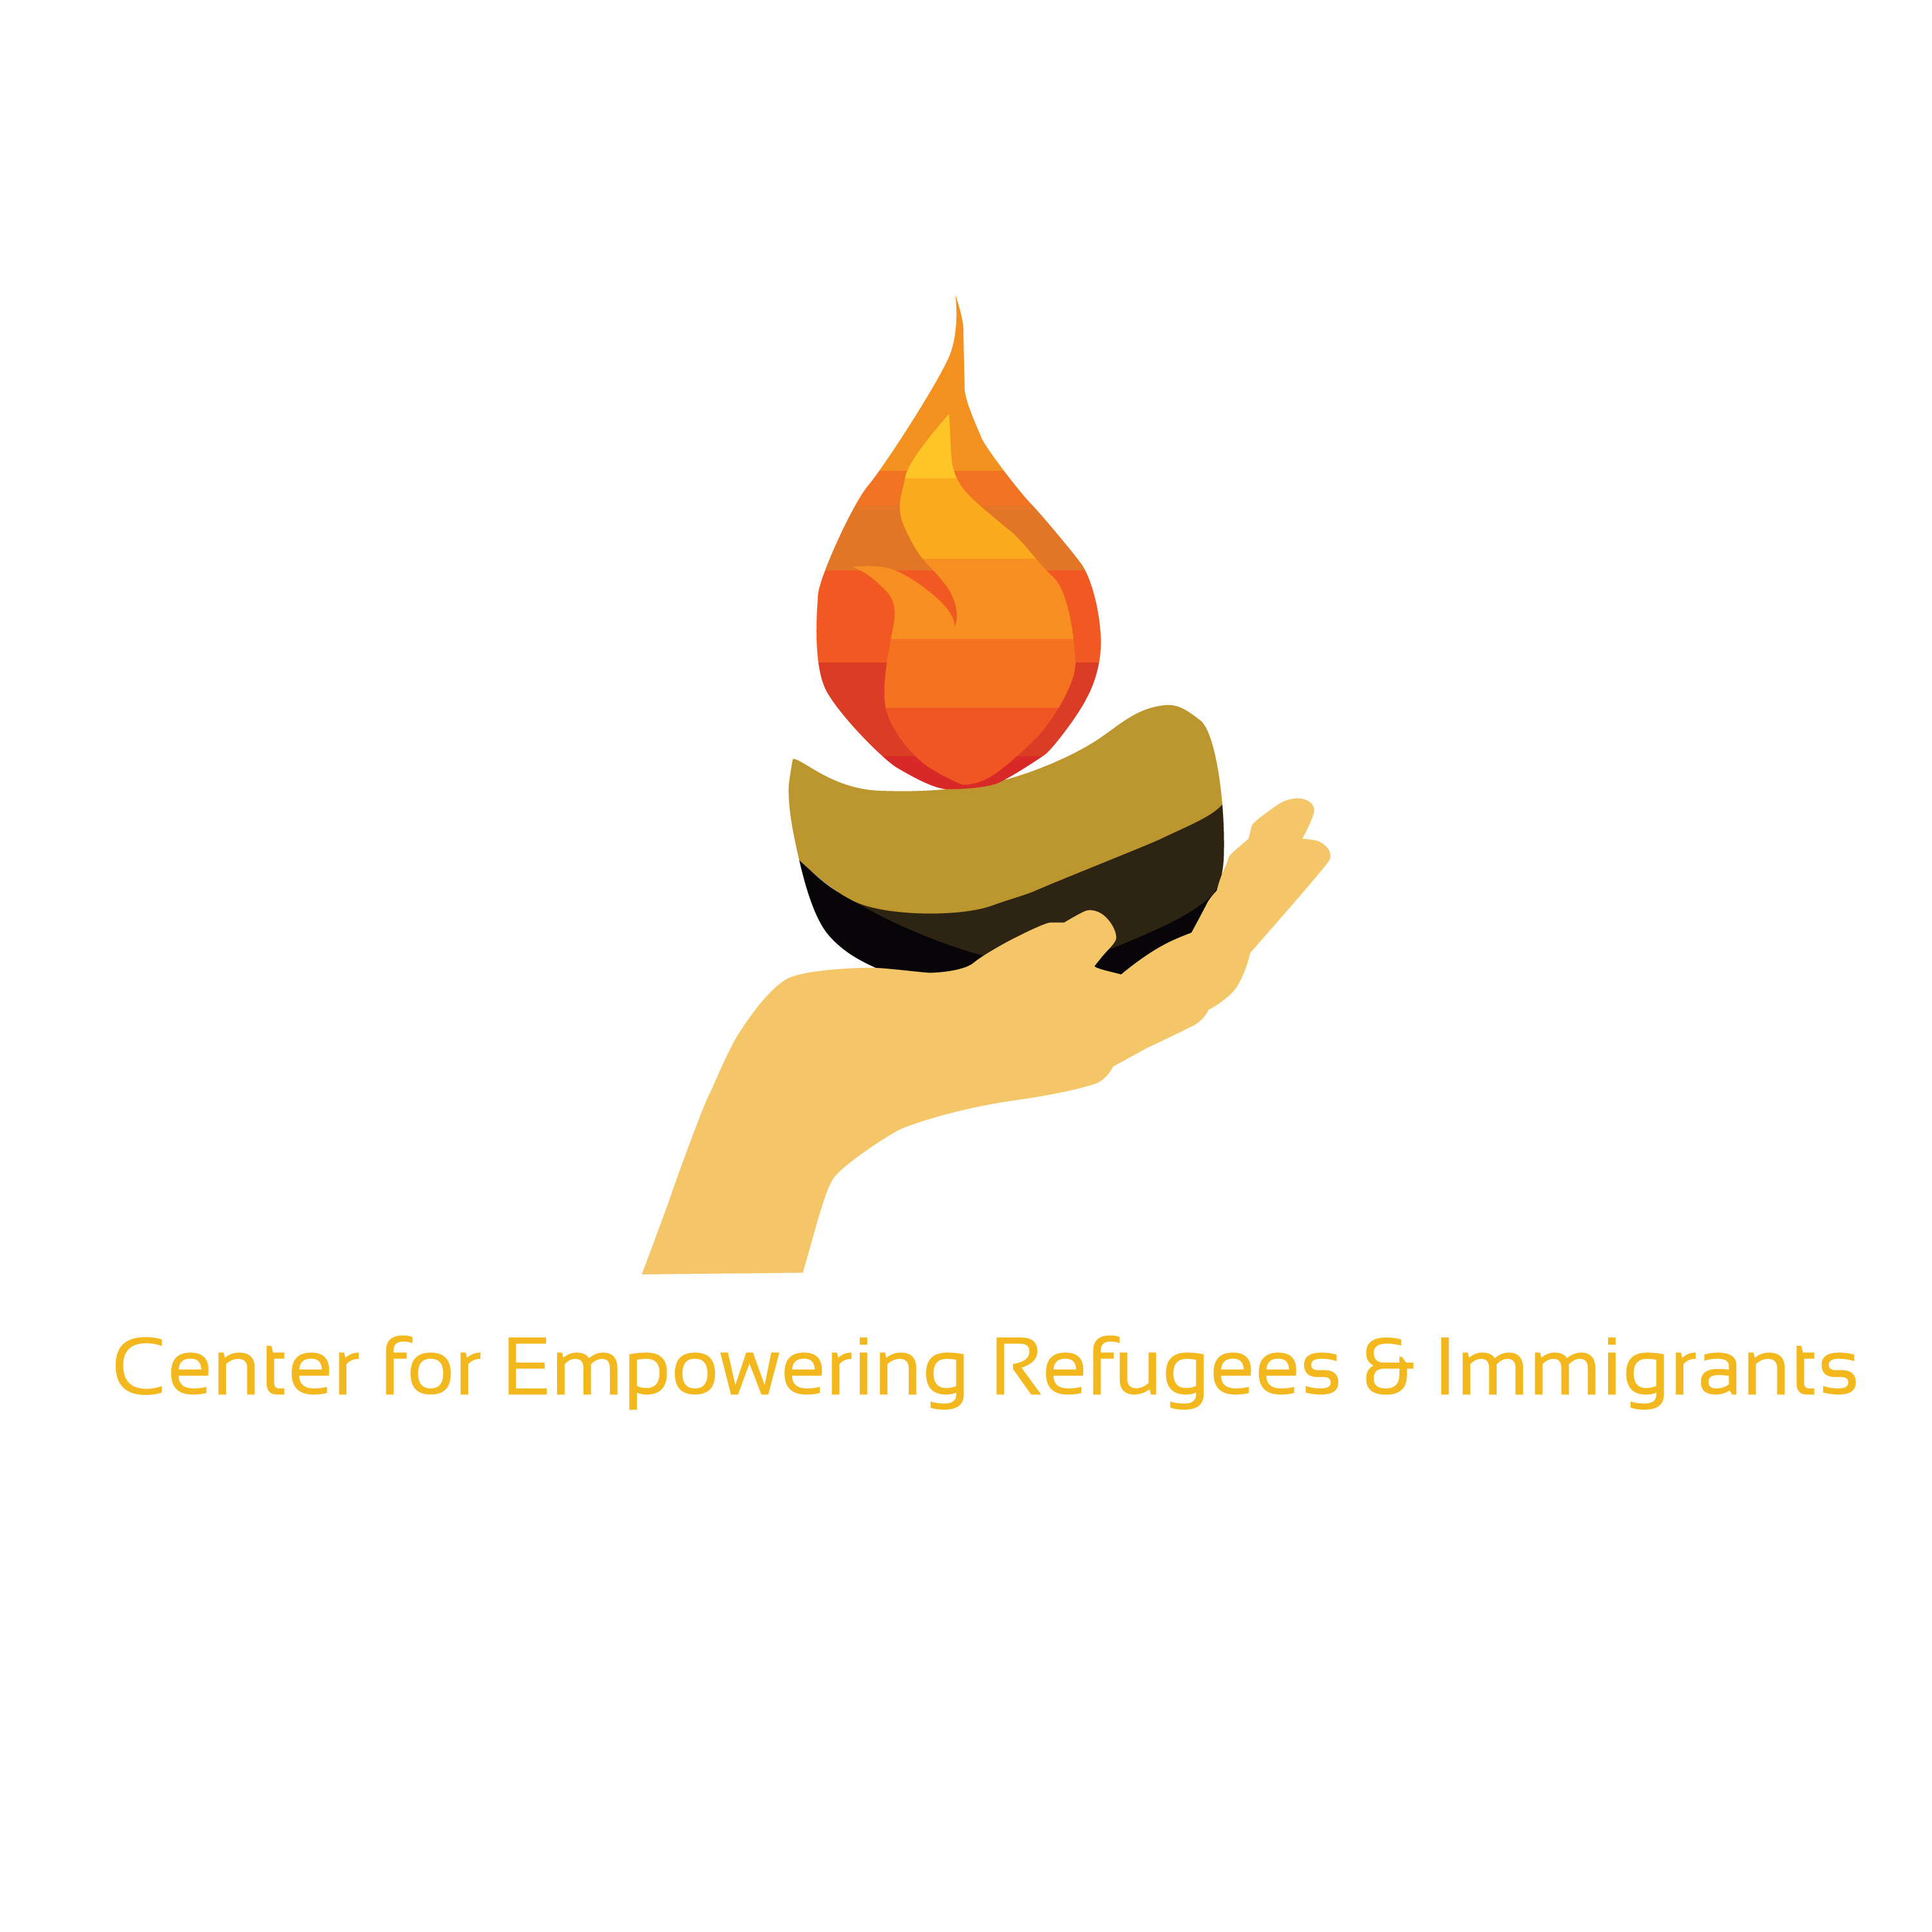 Center for Empowering Refugees and Immigrants - CERI